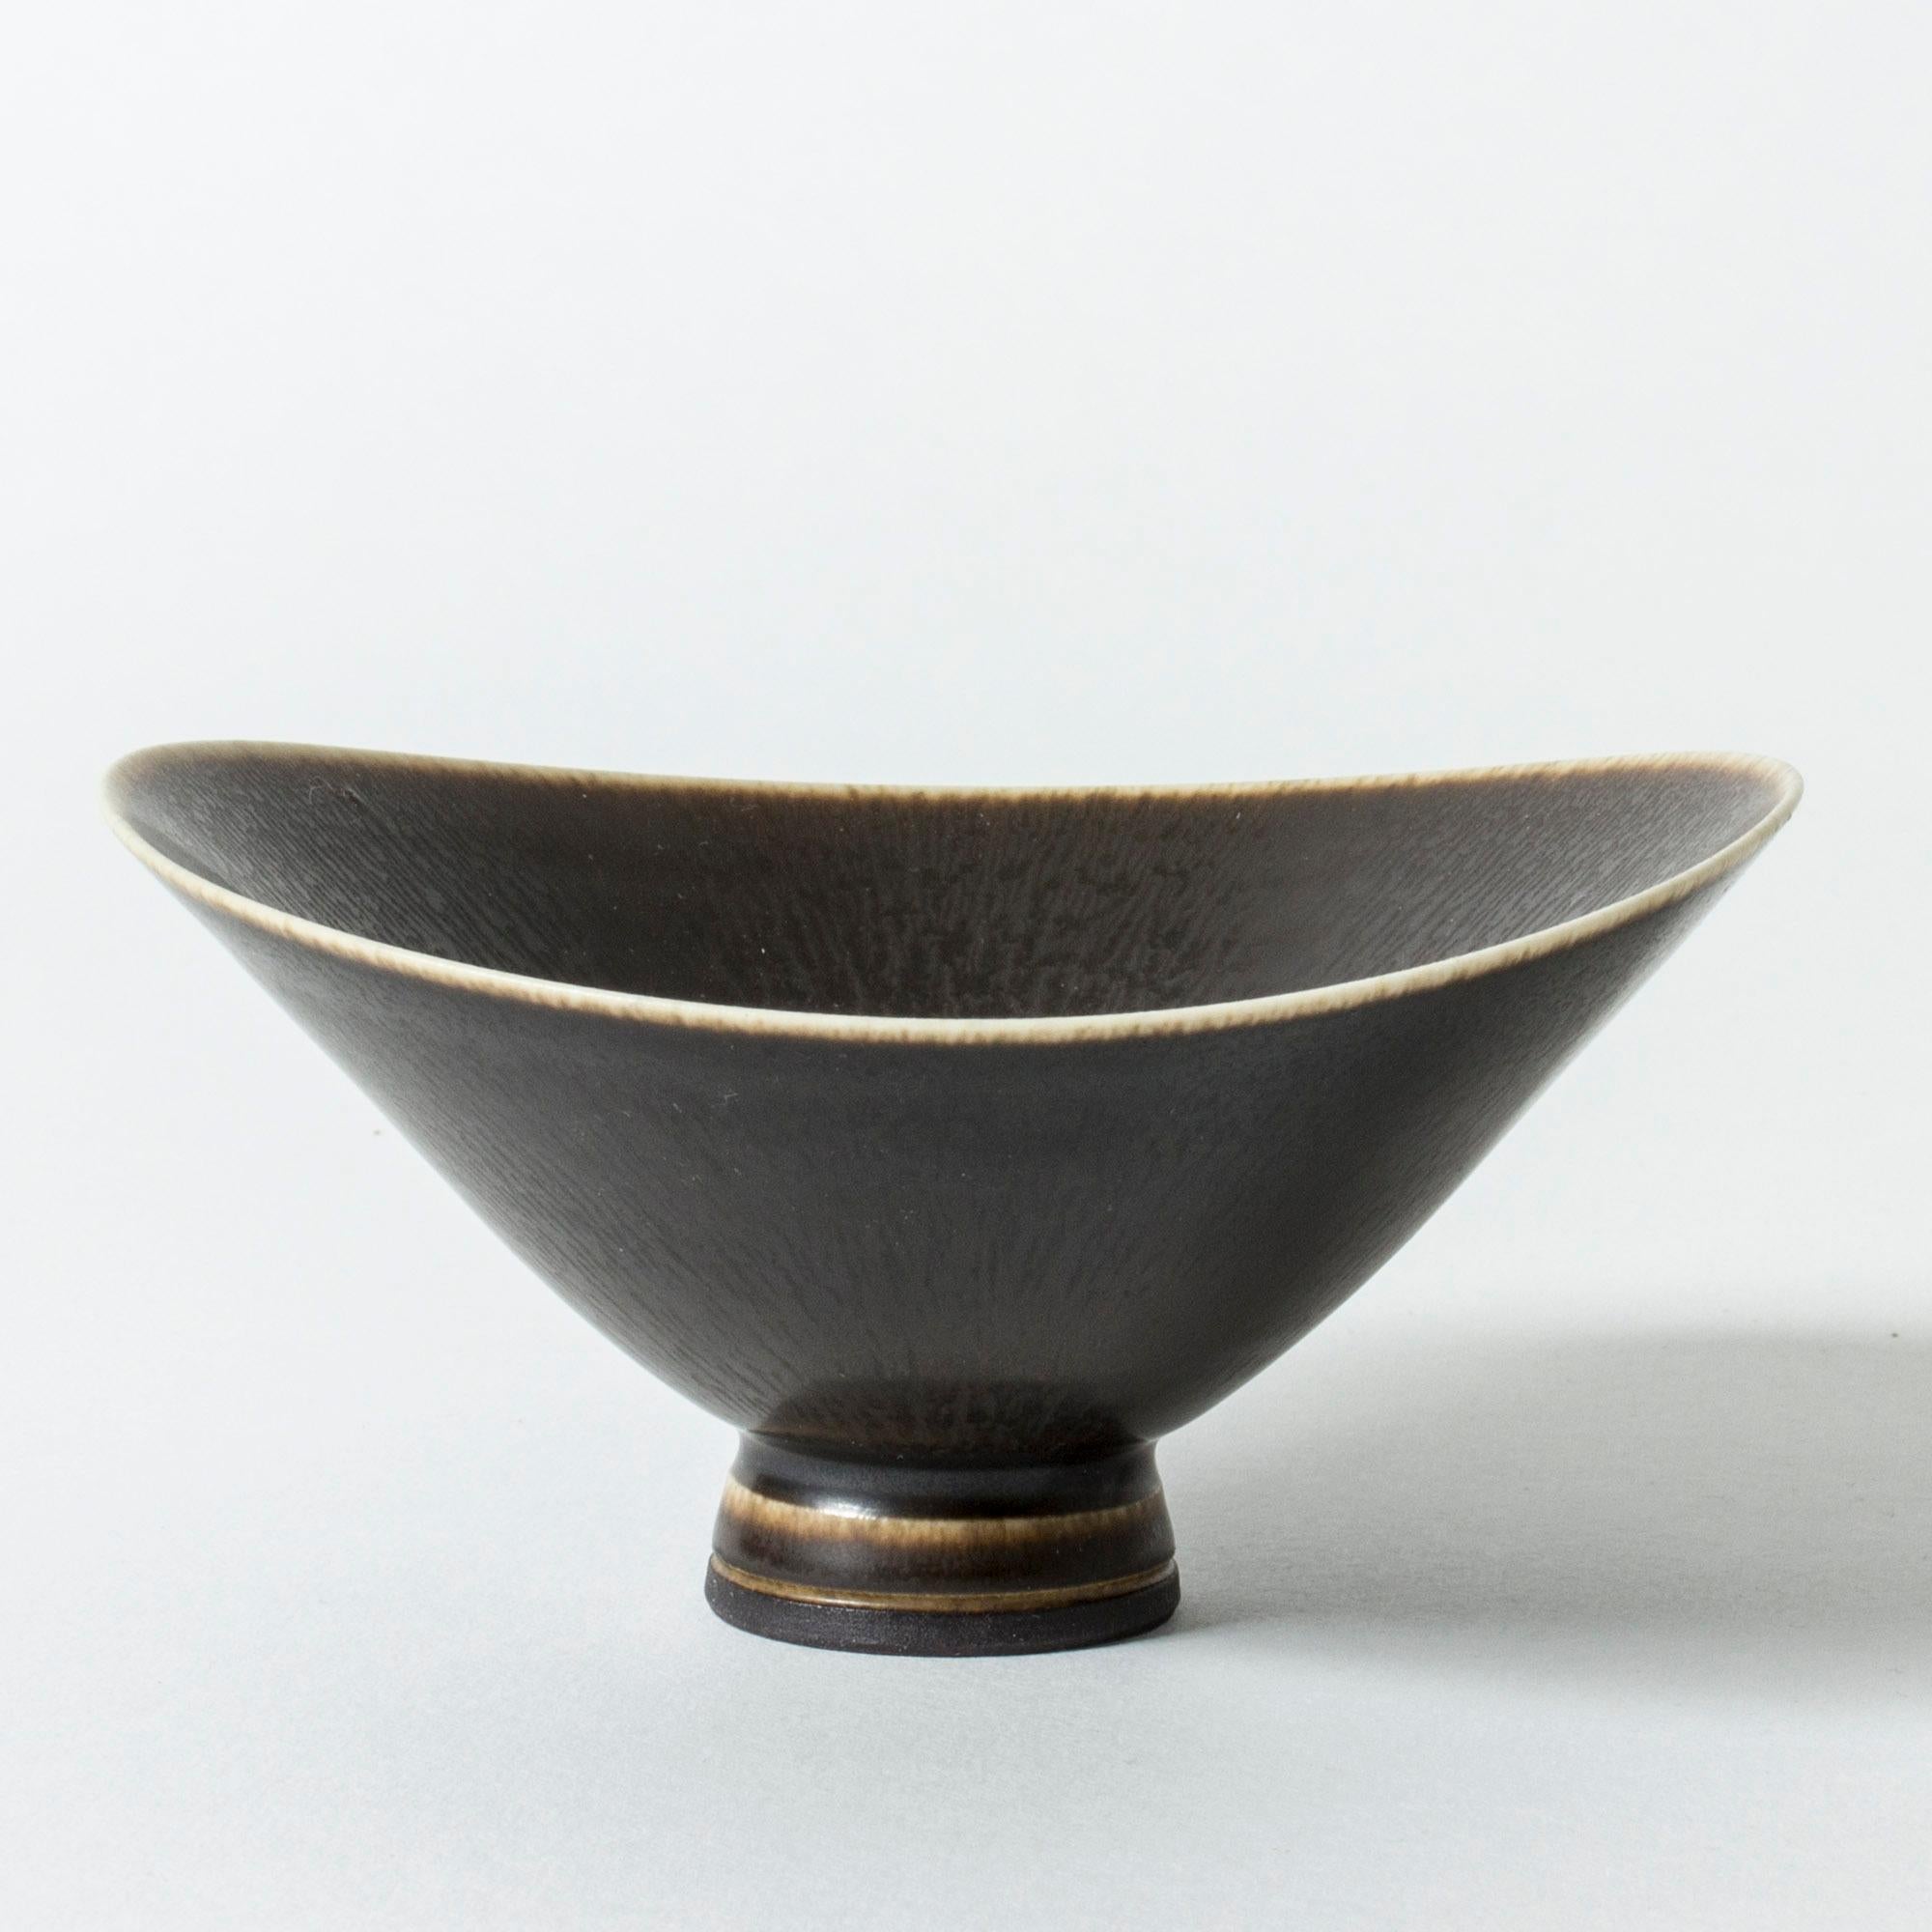 Beautiful stoneware bowl by Berndt Friberg. Oval form, undulating edge. Dark brown hare’s fur glaze.

Berndt Friberg was a Swedish ceramicist, renowned for his stoneware vases and vessels for Gustavsberg. His pure, composed designs with satiny,